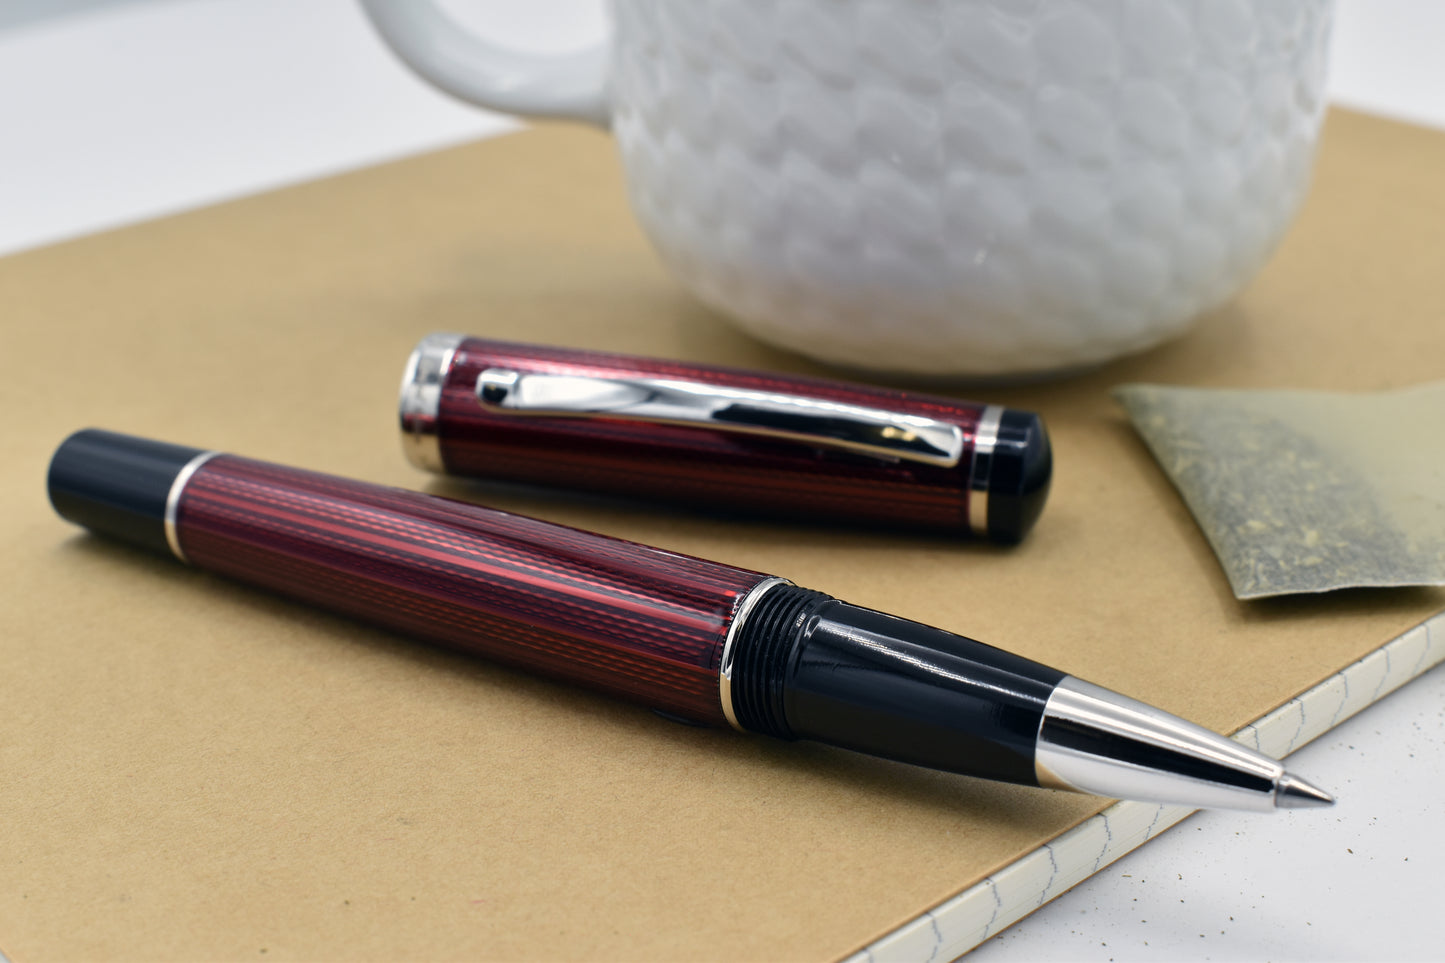 Incognito Burgundy R-1 Rollerball pen next to a mug